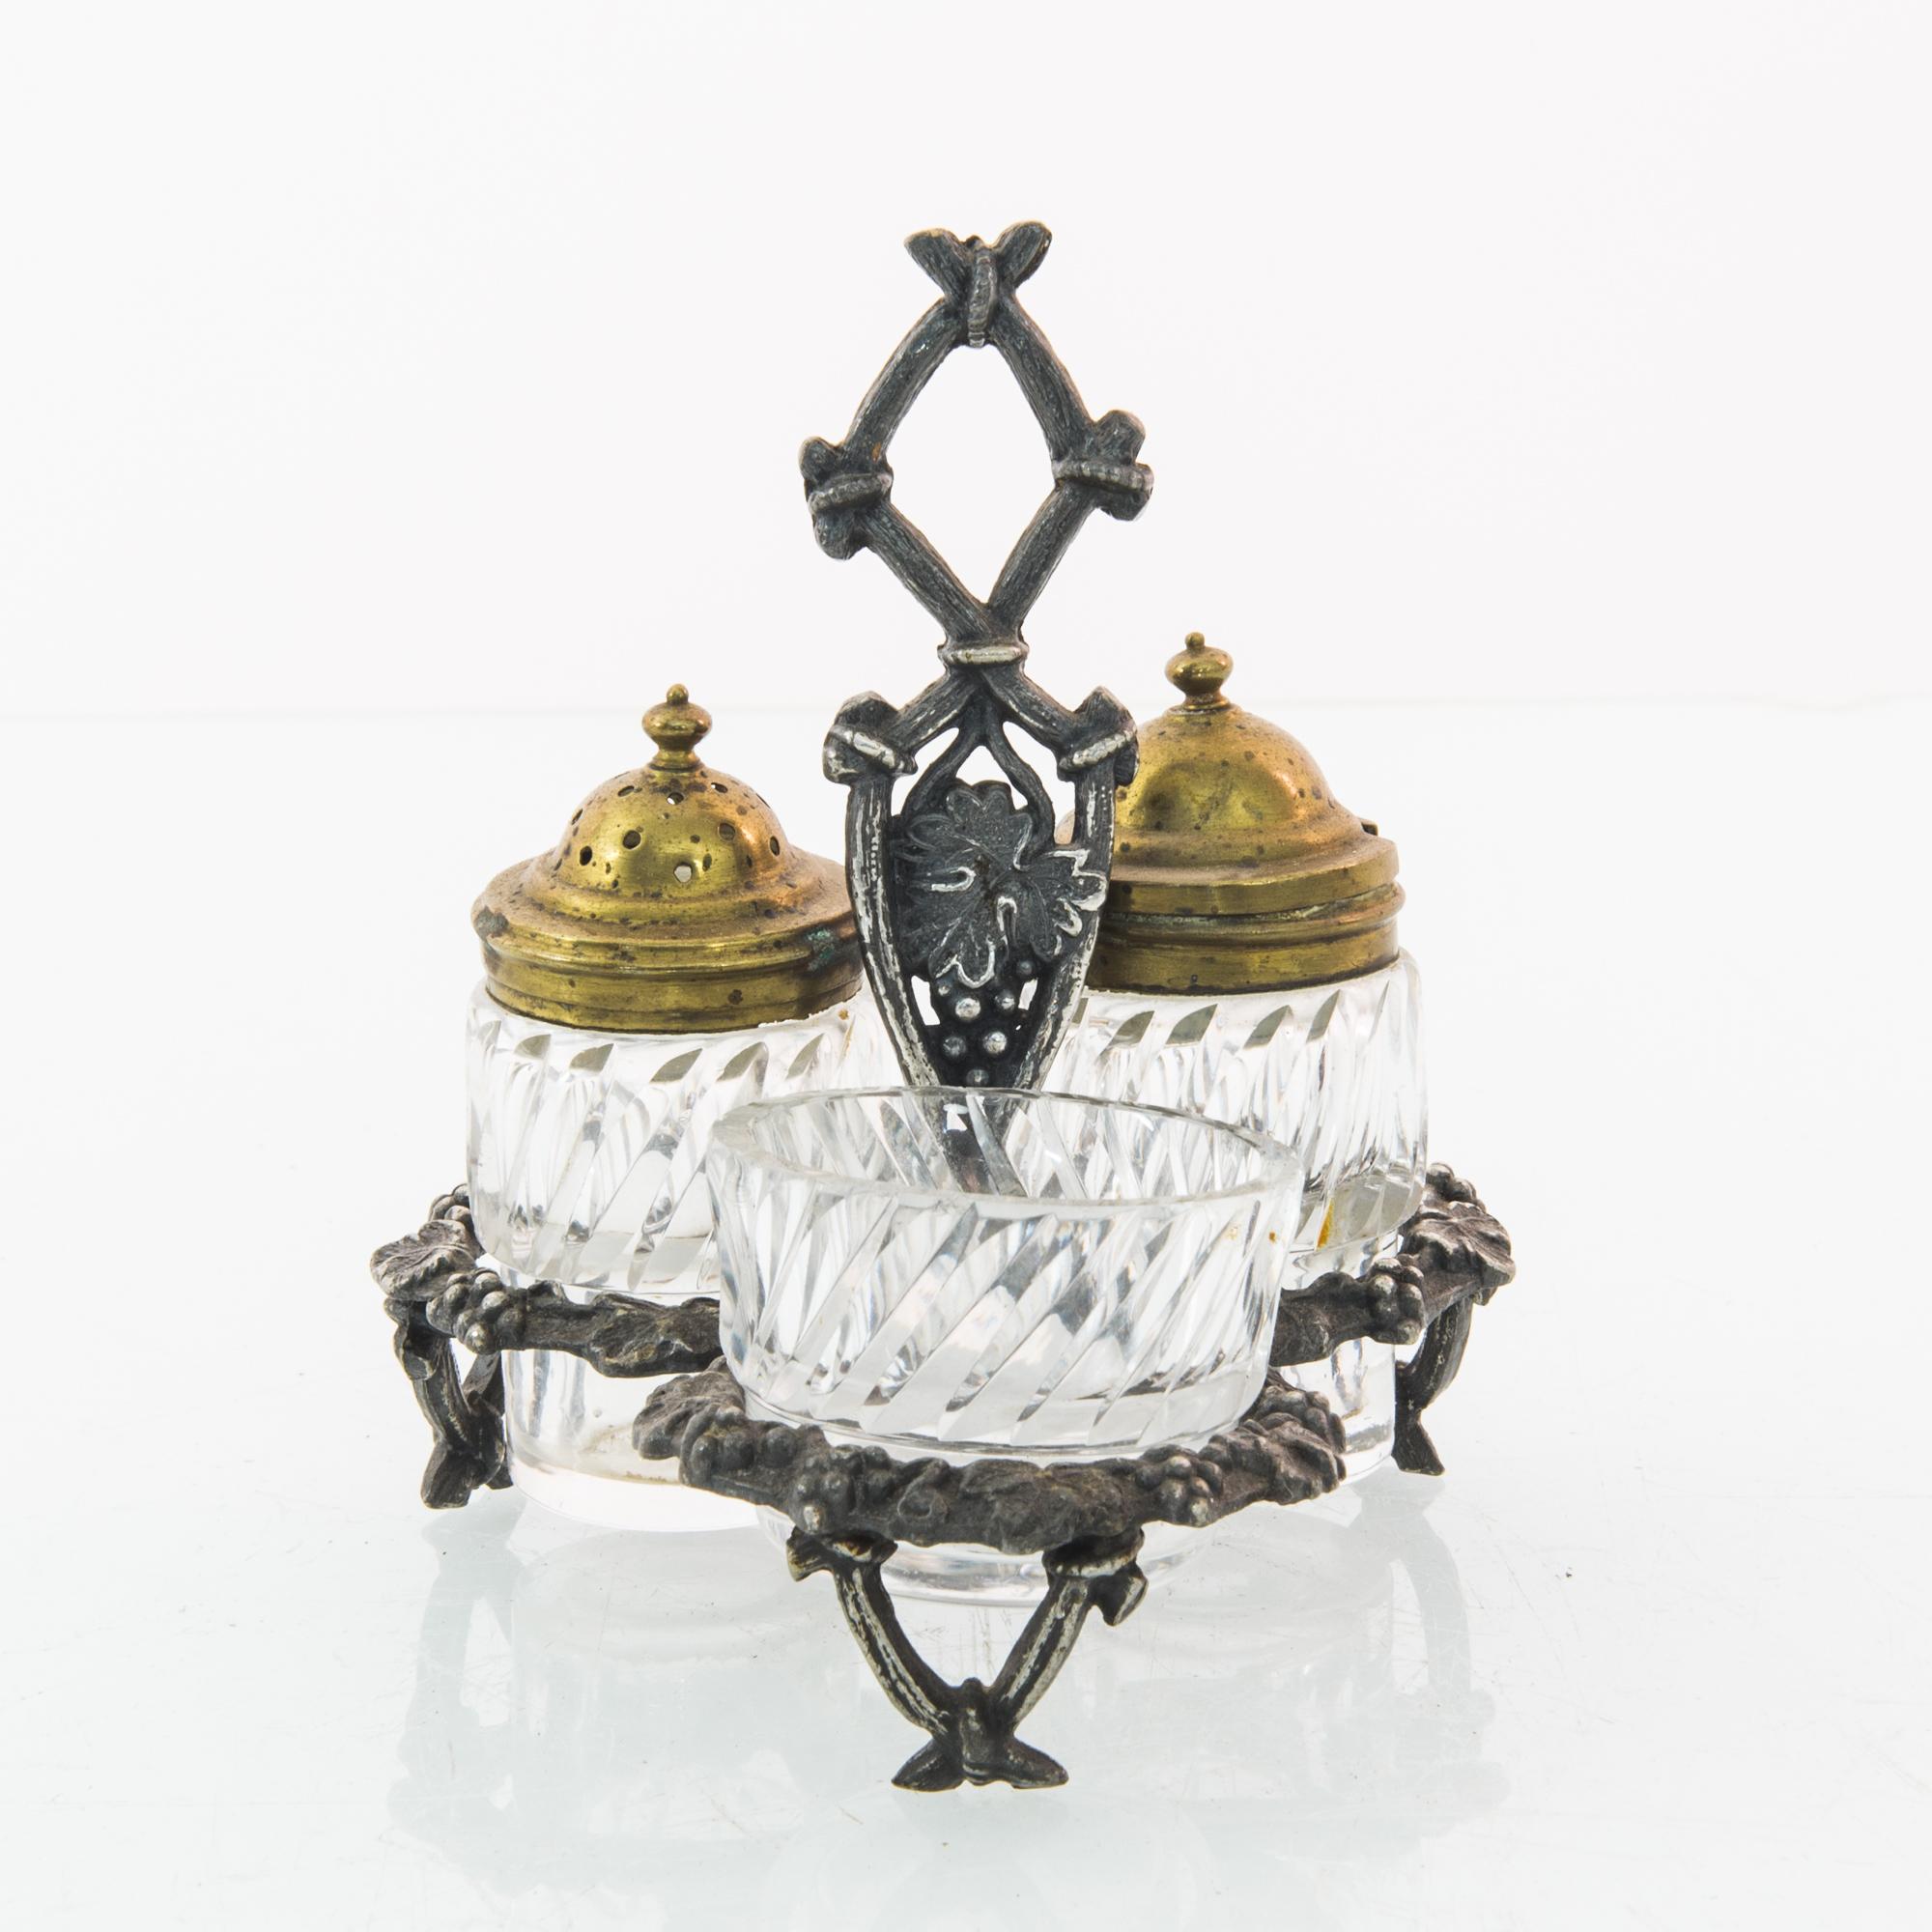 A metal rack from France with cut glass shakers and dish. An elaborate stand of silver metal supports two glass spice containers with gilded lids and a glass cup. The surface of the glass is cut with diagonal accents; the golden brass cupolas of the